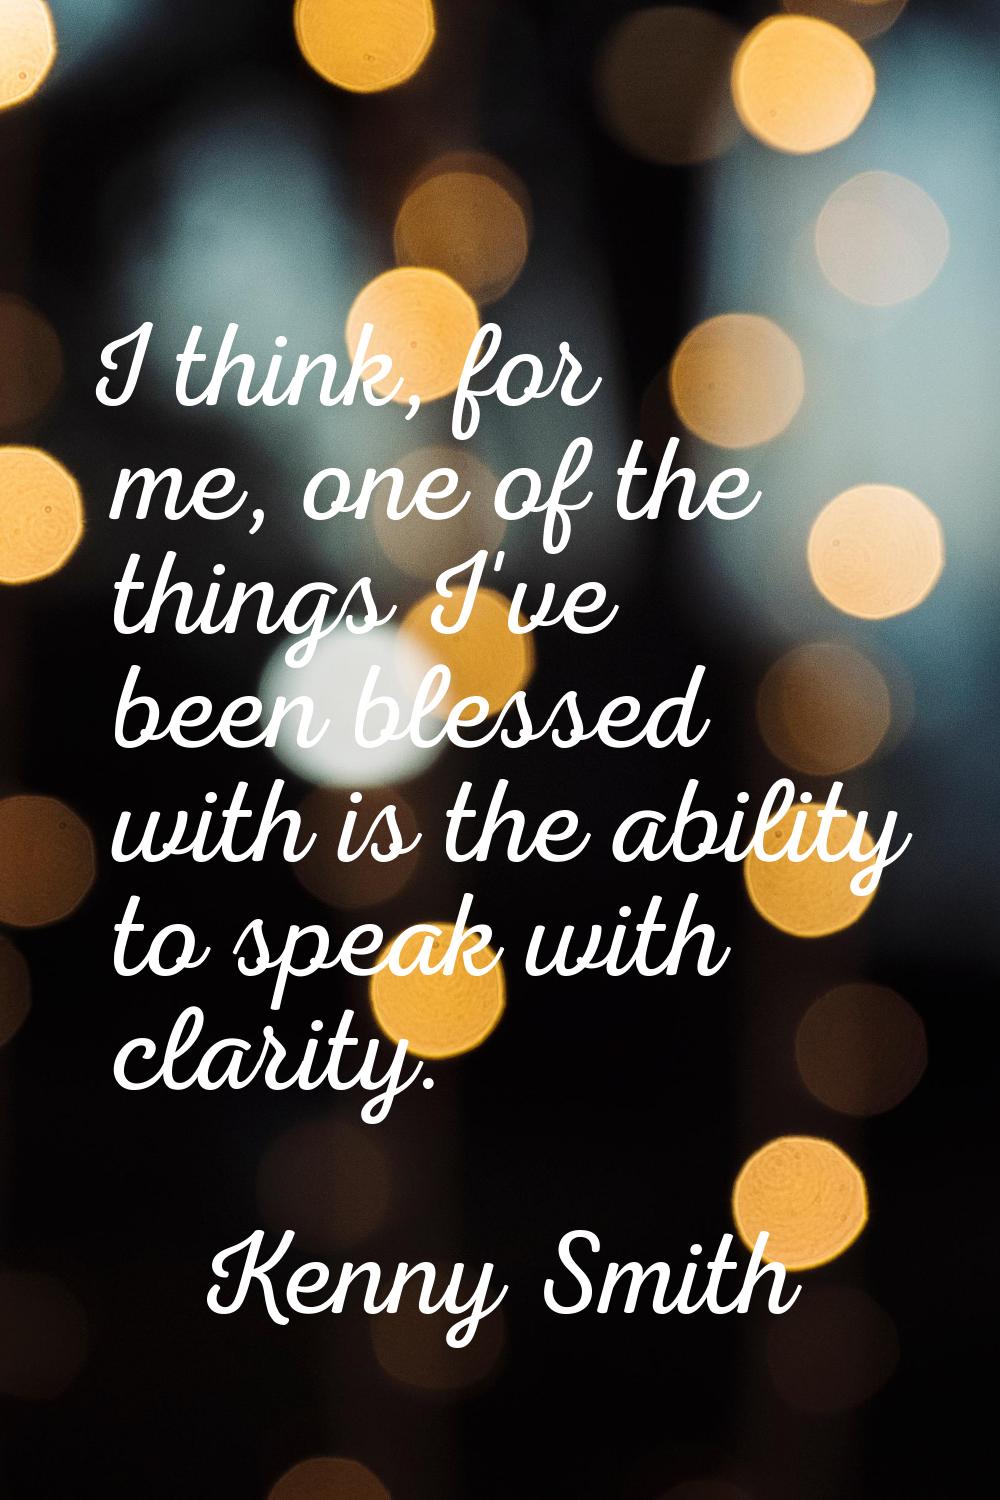 I think, for me, one of the things I've been blessed with is the ability to speak with clarity.